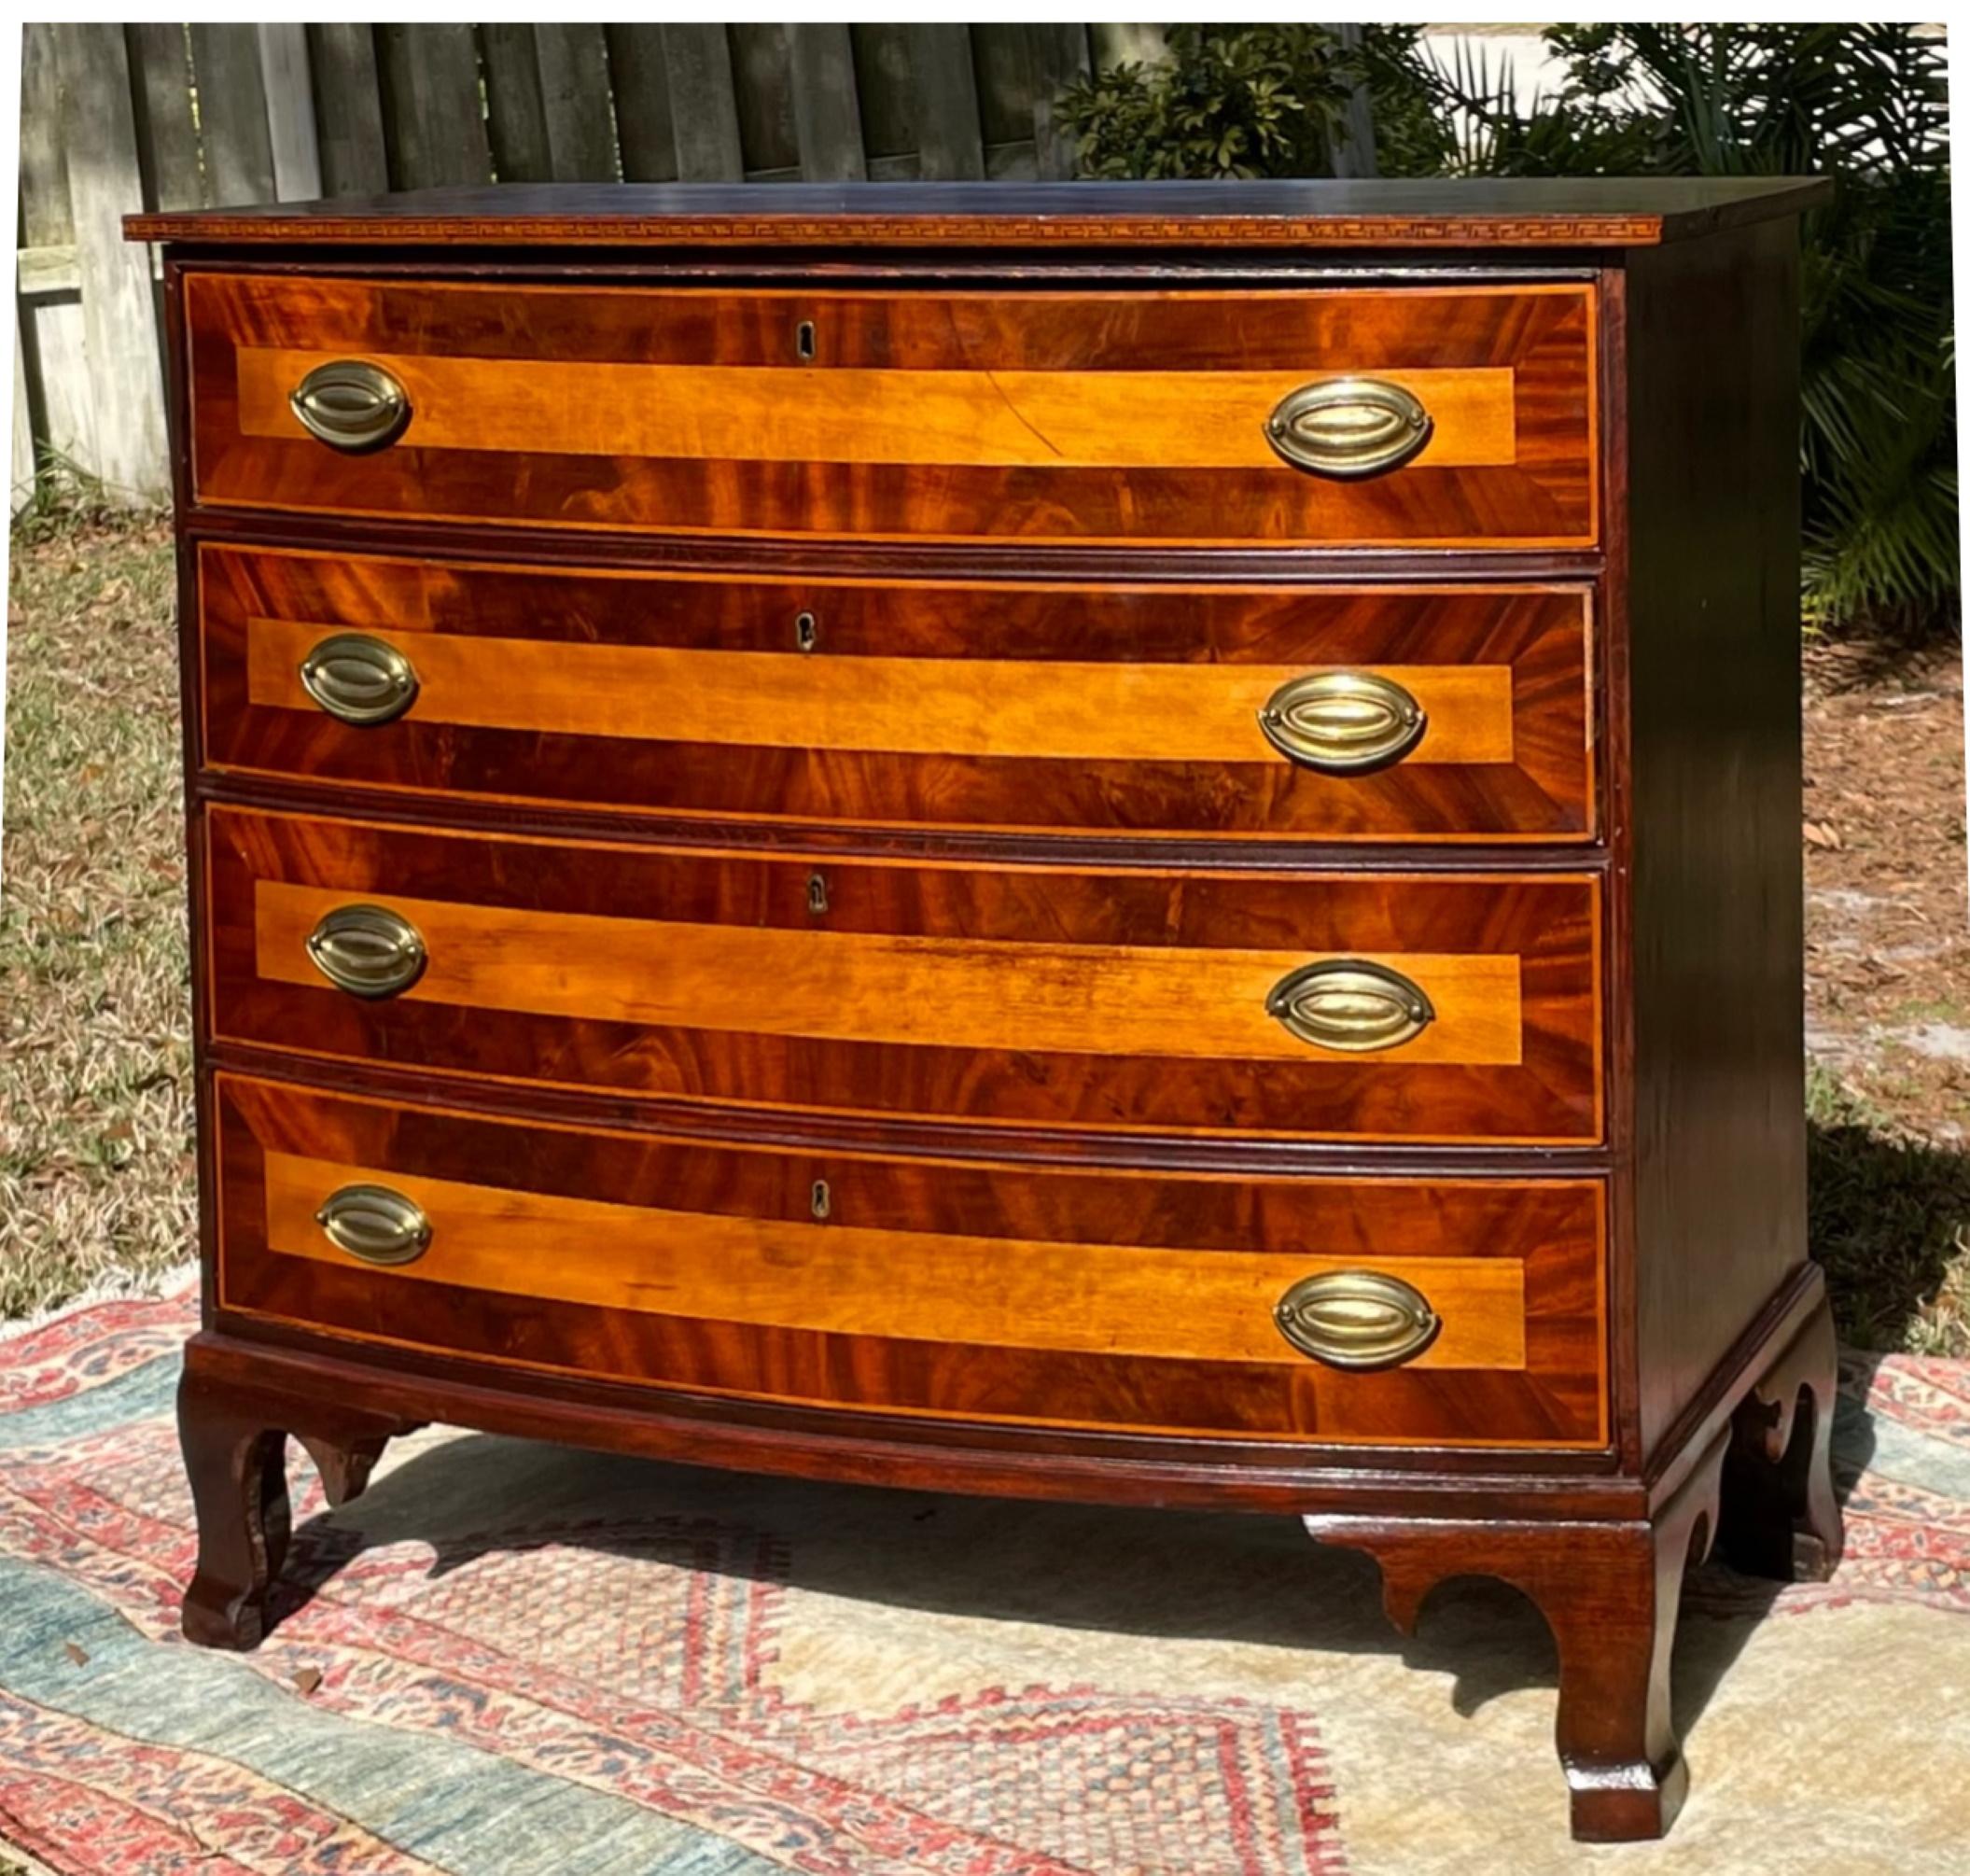 American Hepplewhite Bow Front Chest of Drawers with Satinwood Banding

This handsome chest features wide satinwood banding on the four bowed drawer fronts. The piece is all original and dates to the early 19th Century. Slightly flaring French